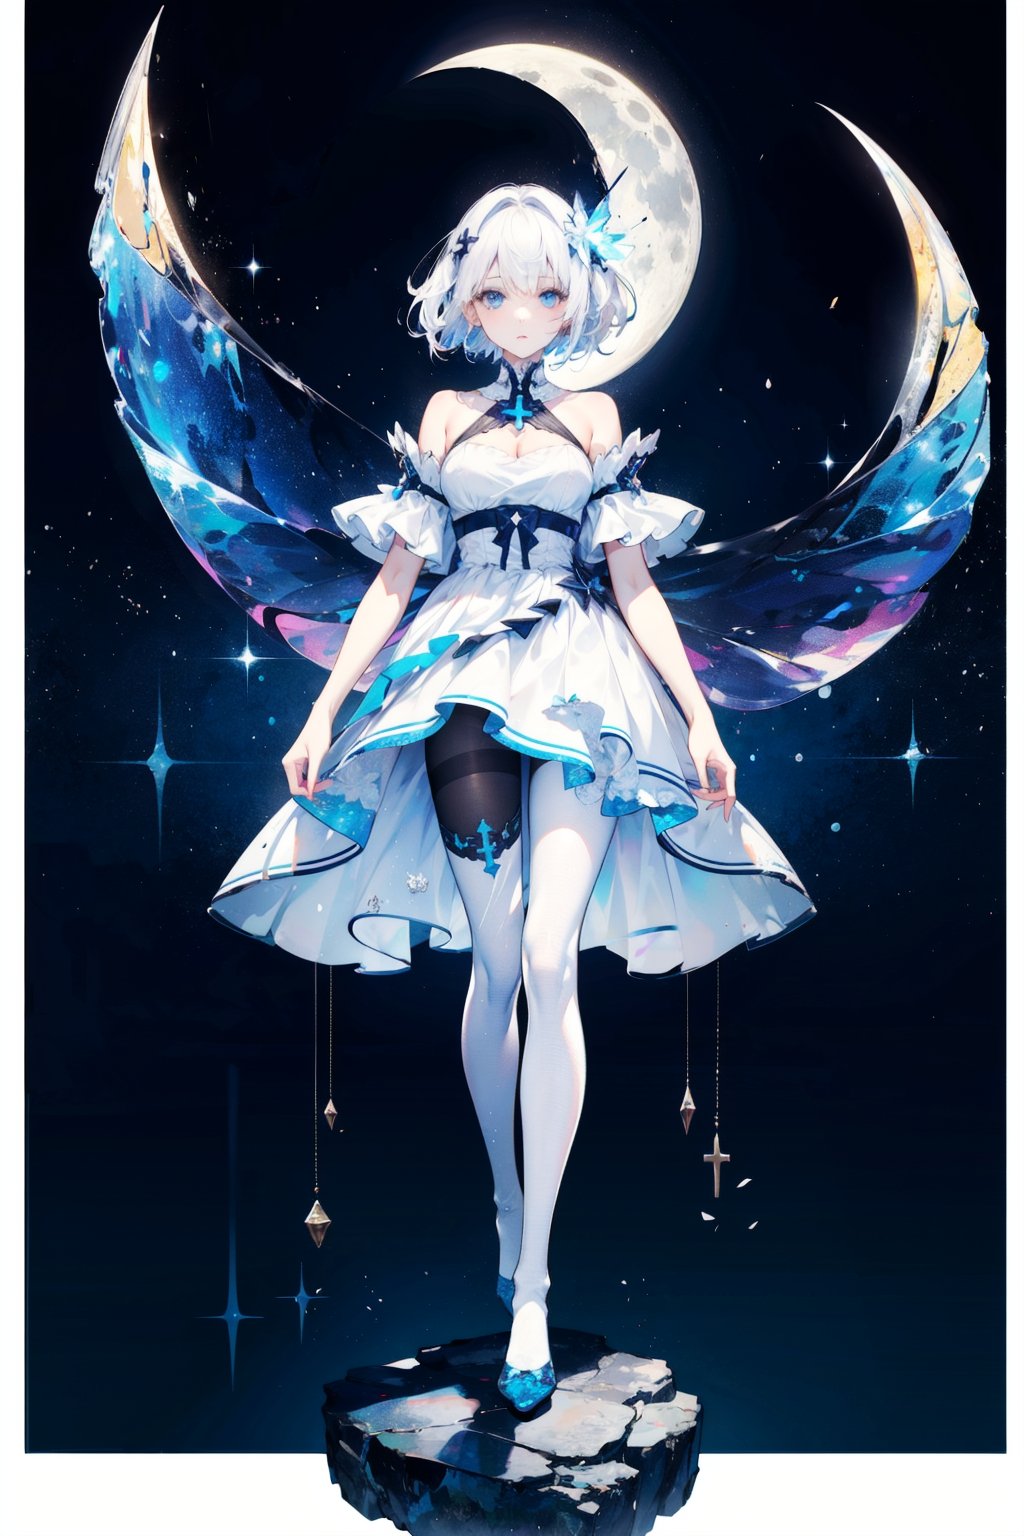 1 girl,starry sky,(White with luster (transparency:1.4) Crotchless pantyhose),moon,Picturesque aesthetic style,Blurred foreground,spark,white hair,blue eyes,no shoes,cross_leg,